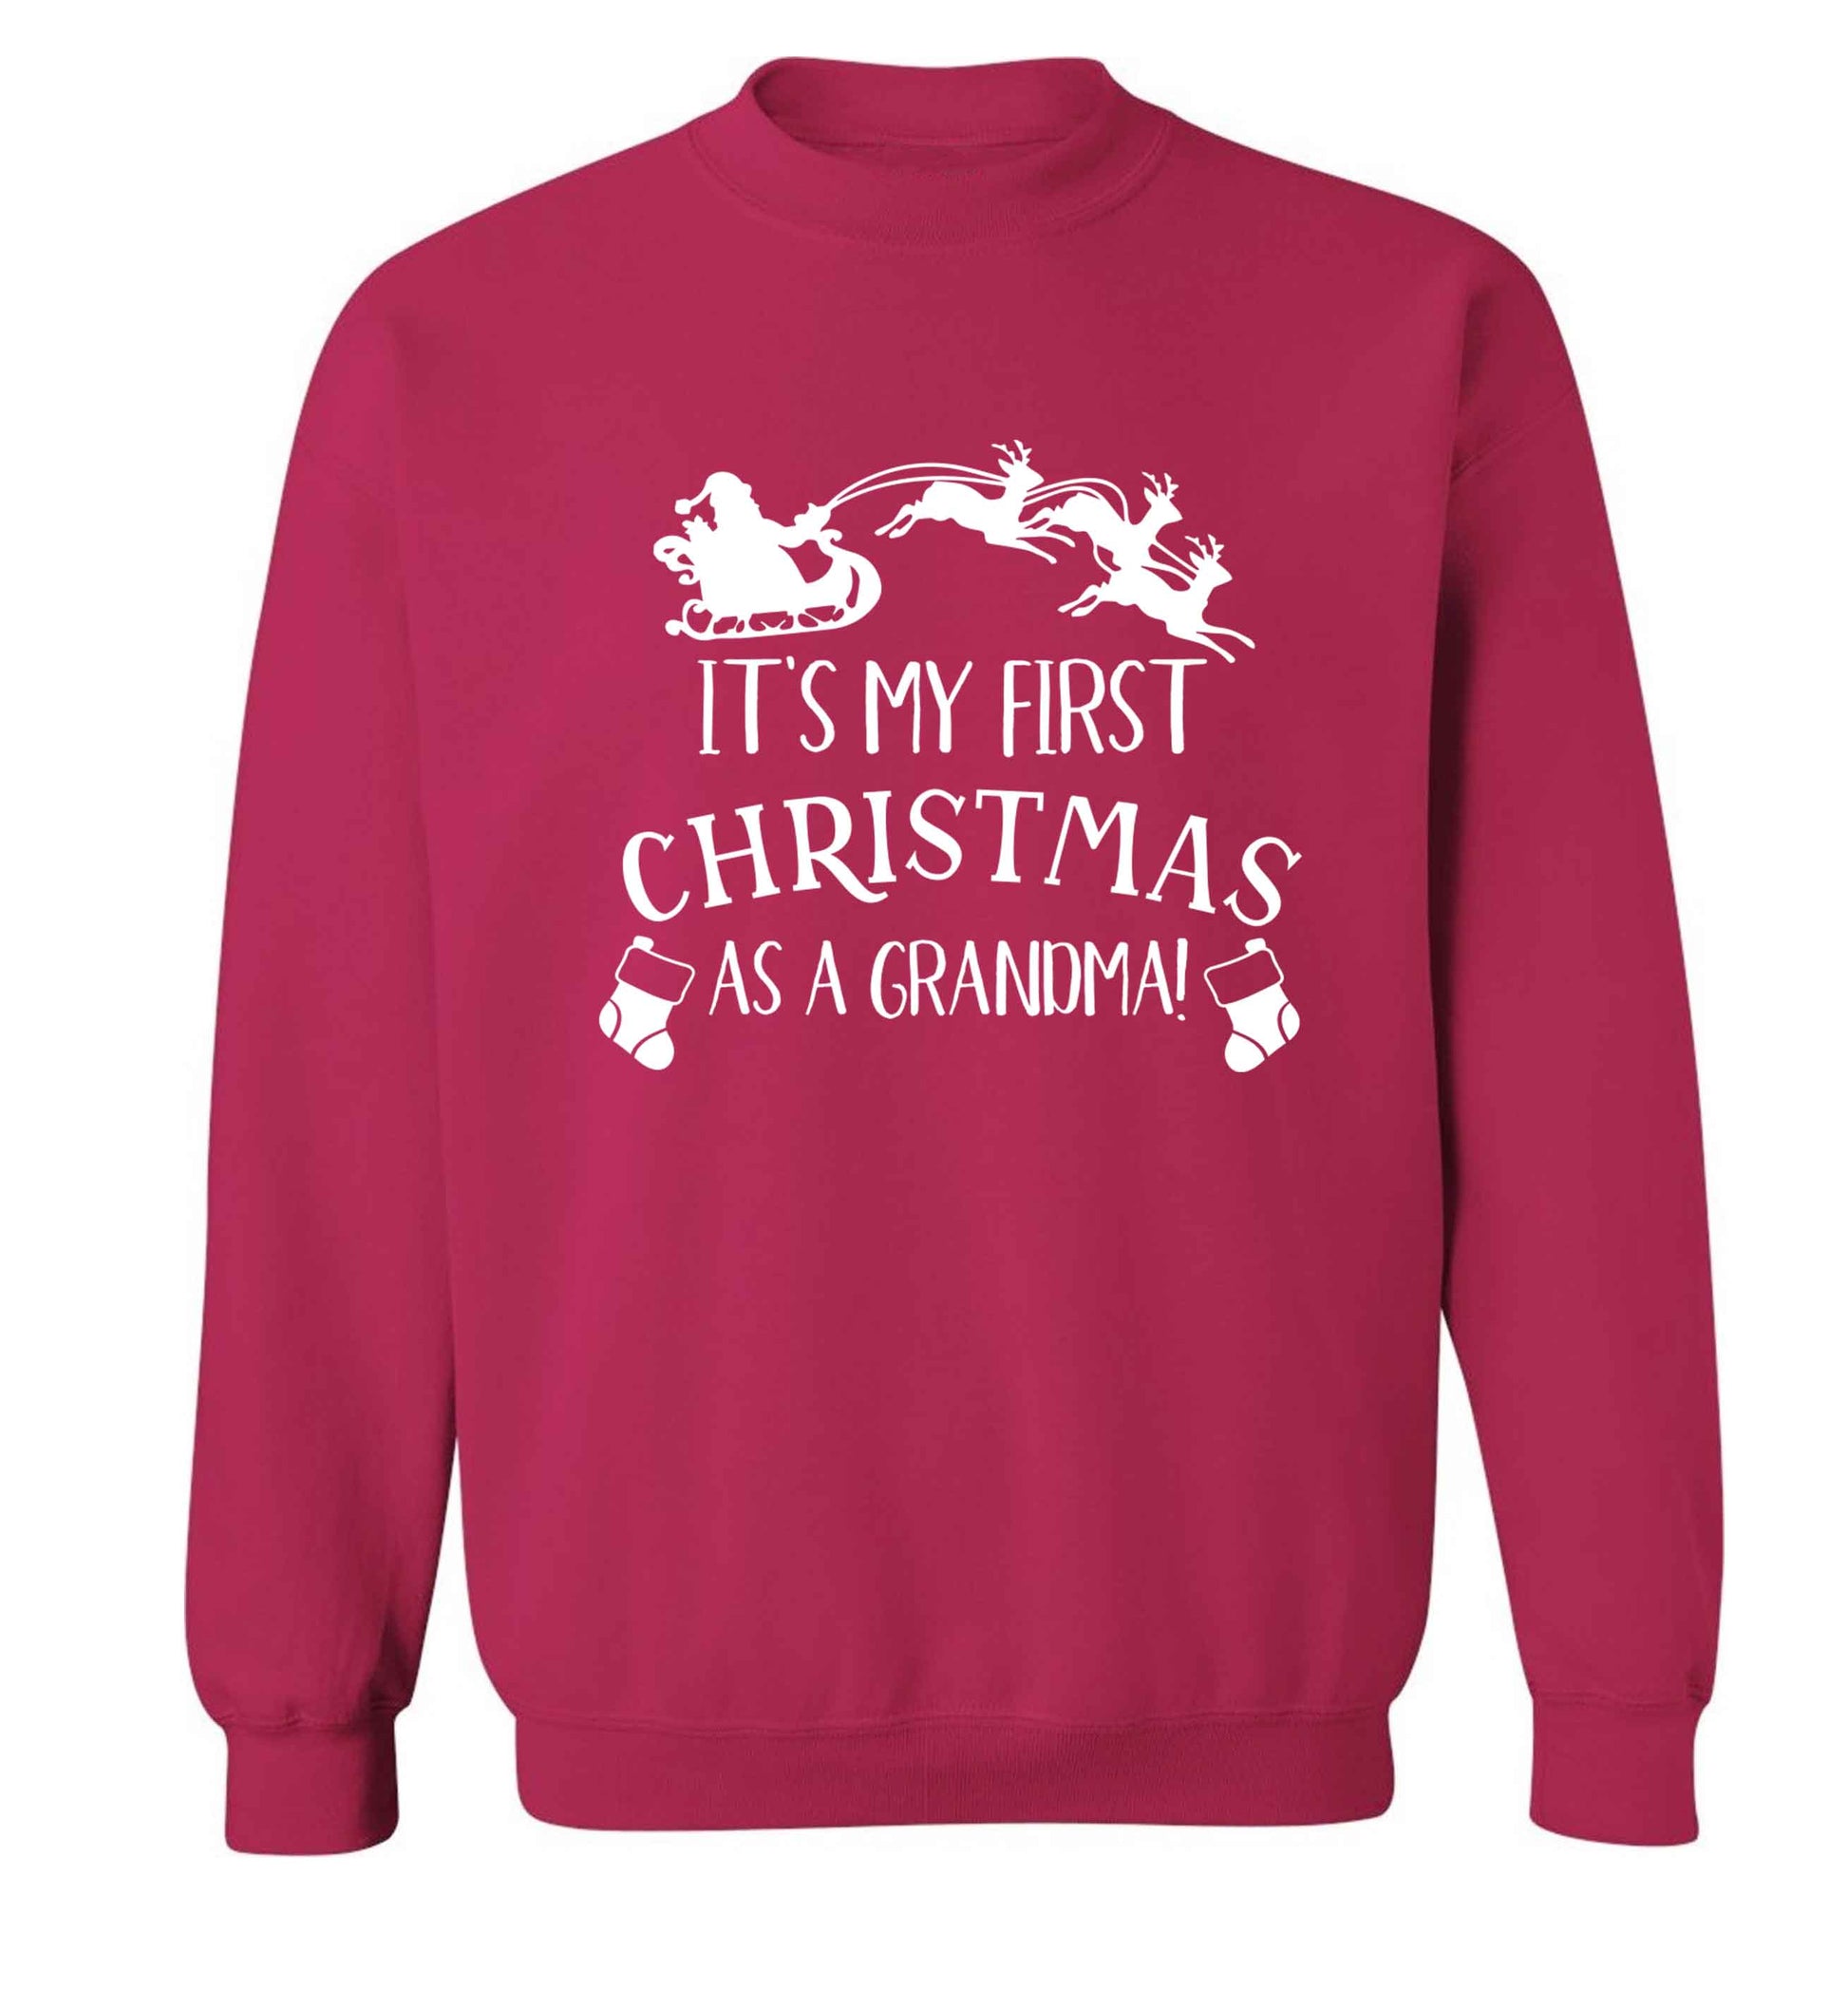 It's my first Christmas as a grandma! Adult's unisex pink Sweater 2XL